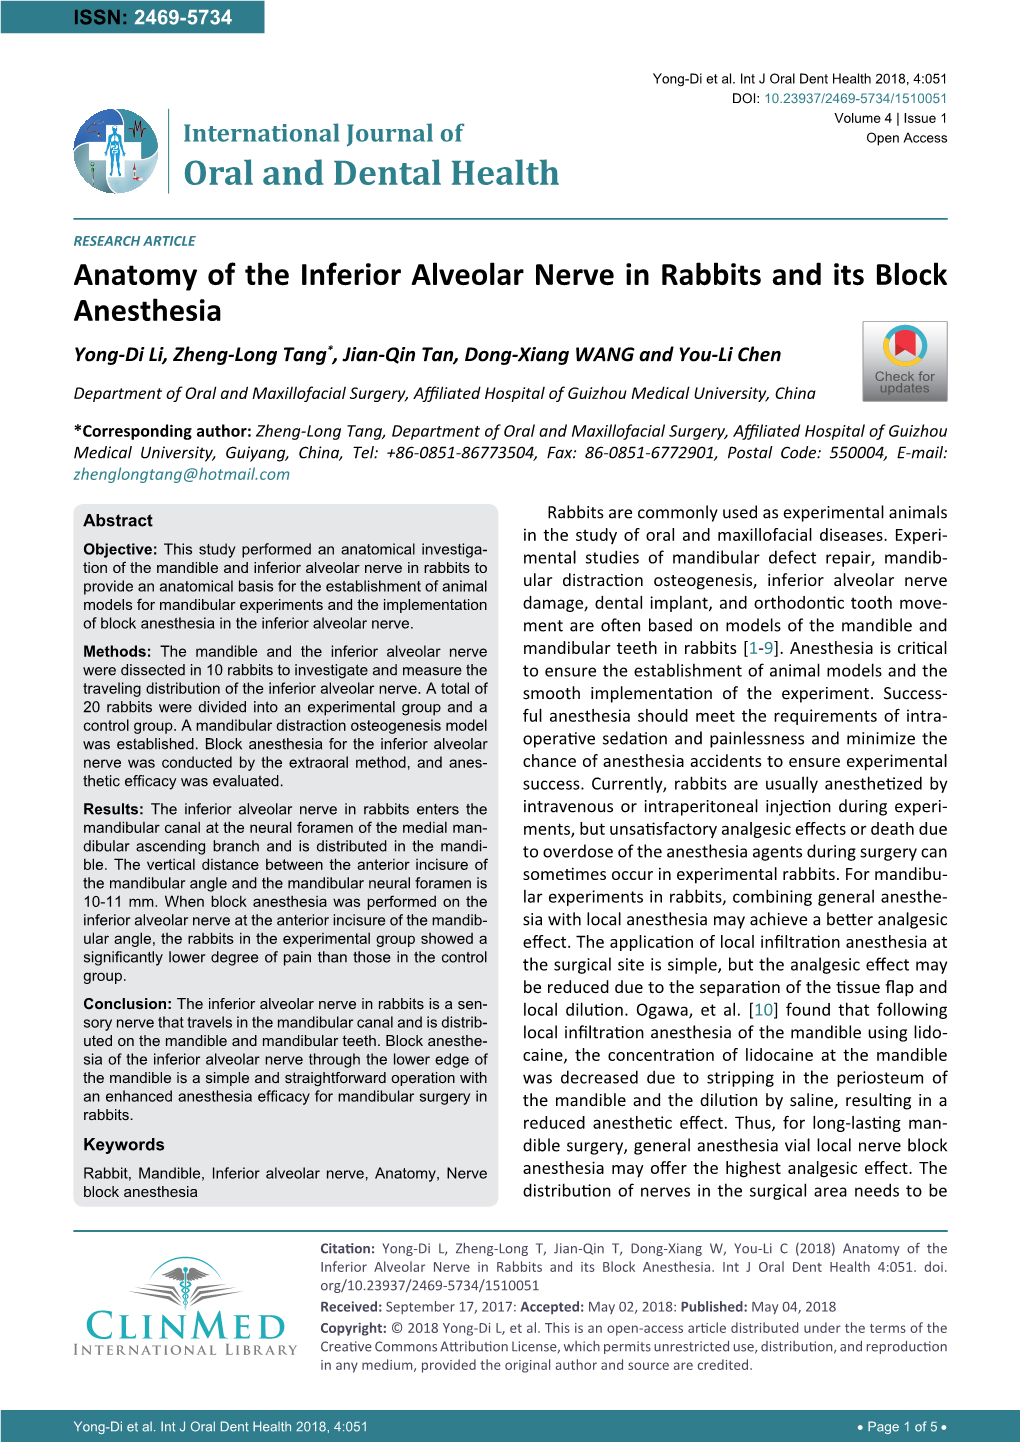 Anatomy of the Inferior Alveolar Nerve in Rabbits and Its Block Anesthesia